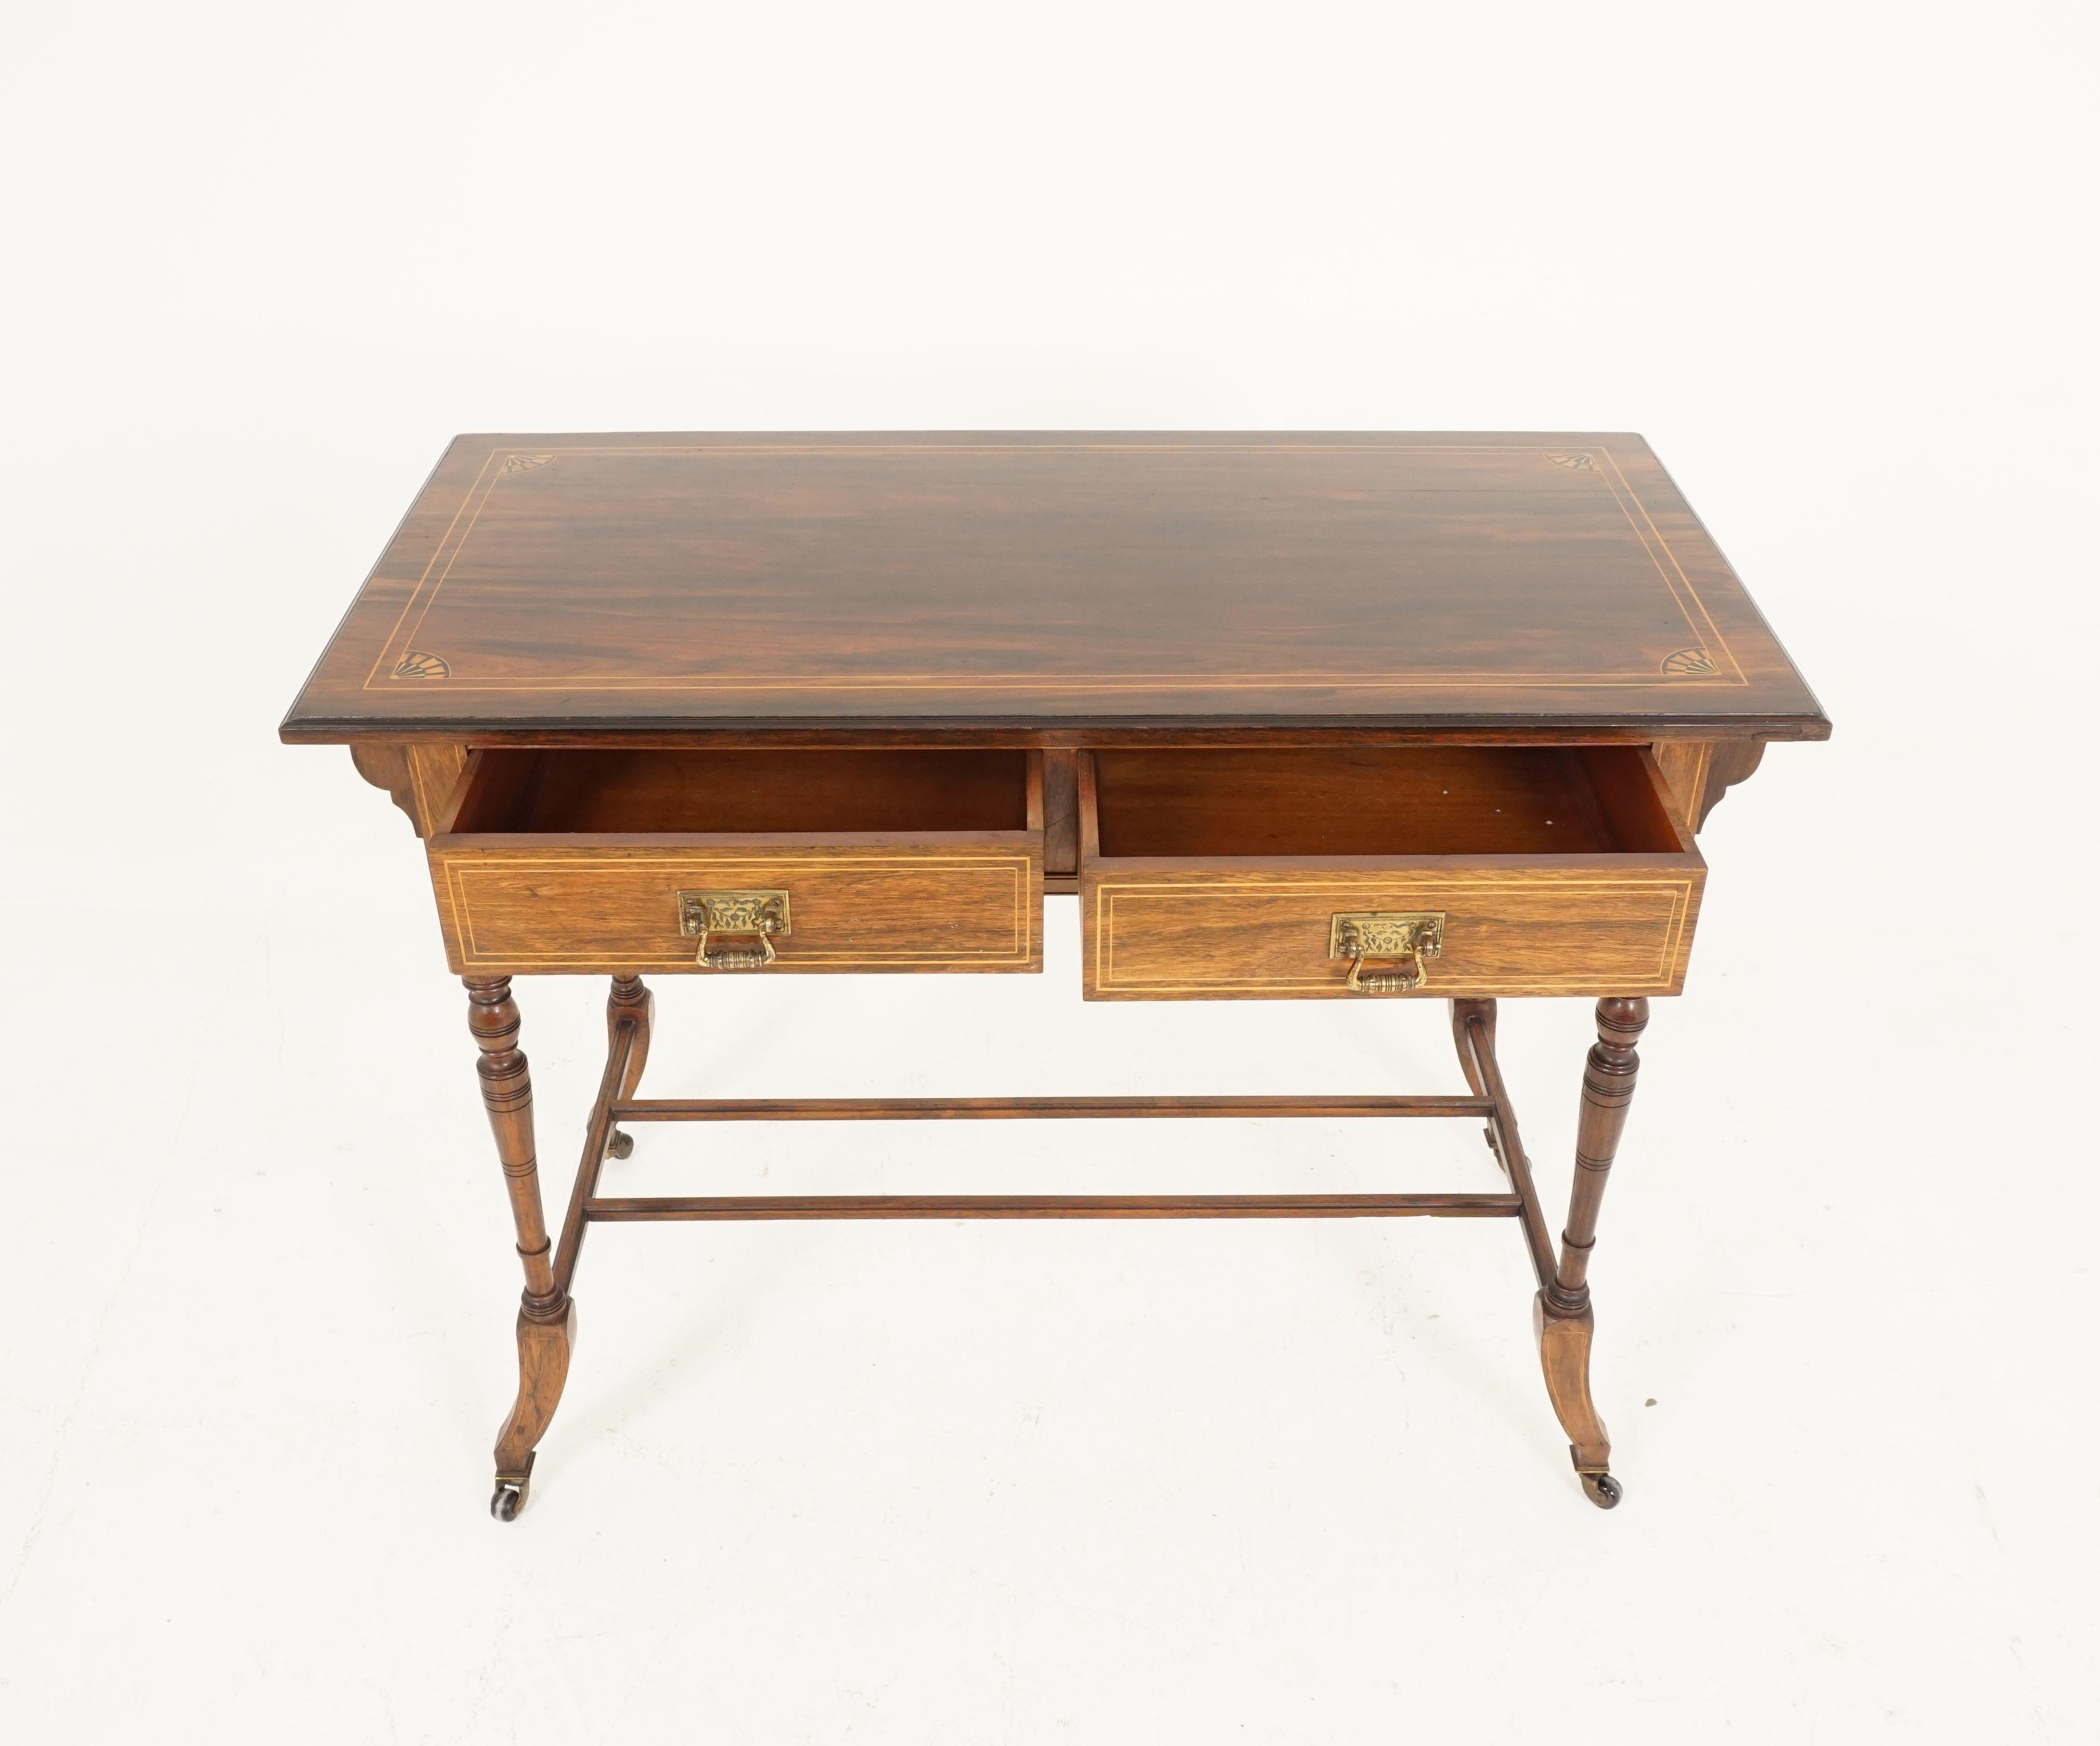 Antique Edwardian Inlaid Writing Table, Rosewood Hall Table, Scotland 1910, B2368

Scotland 1910
Rosewood, Ebony And Boxwood
Original Finish
Rectangular Moulded Top Is Crosshanded With Rosewood, Boxwood And Ebony Inlay
Pair Of Dovetailed